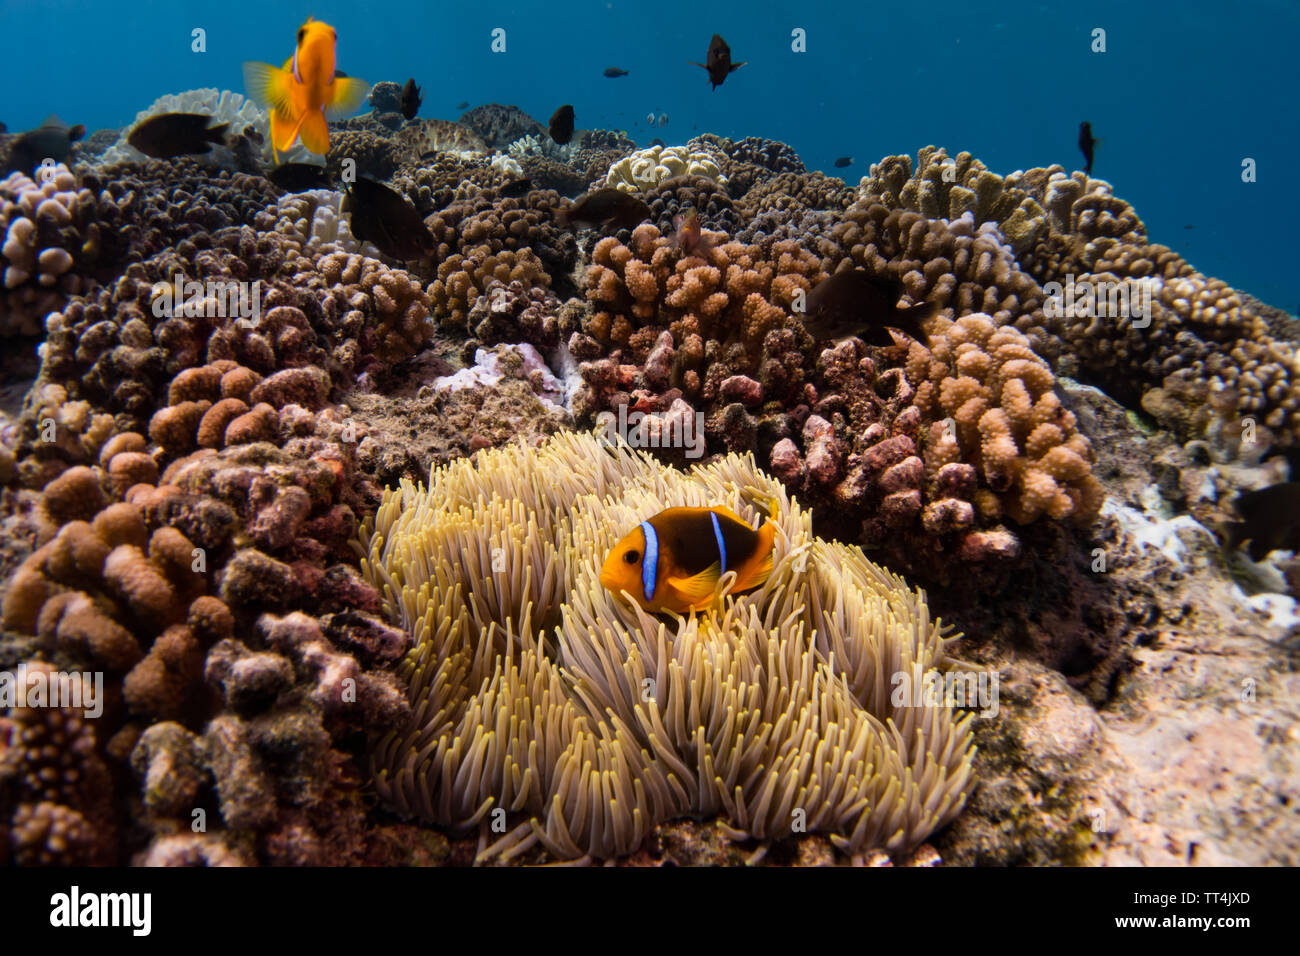 Orange-fin anemonefish in a anemone while Scuba diving in Huahine, French Polynesia Stock Photo